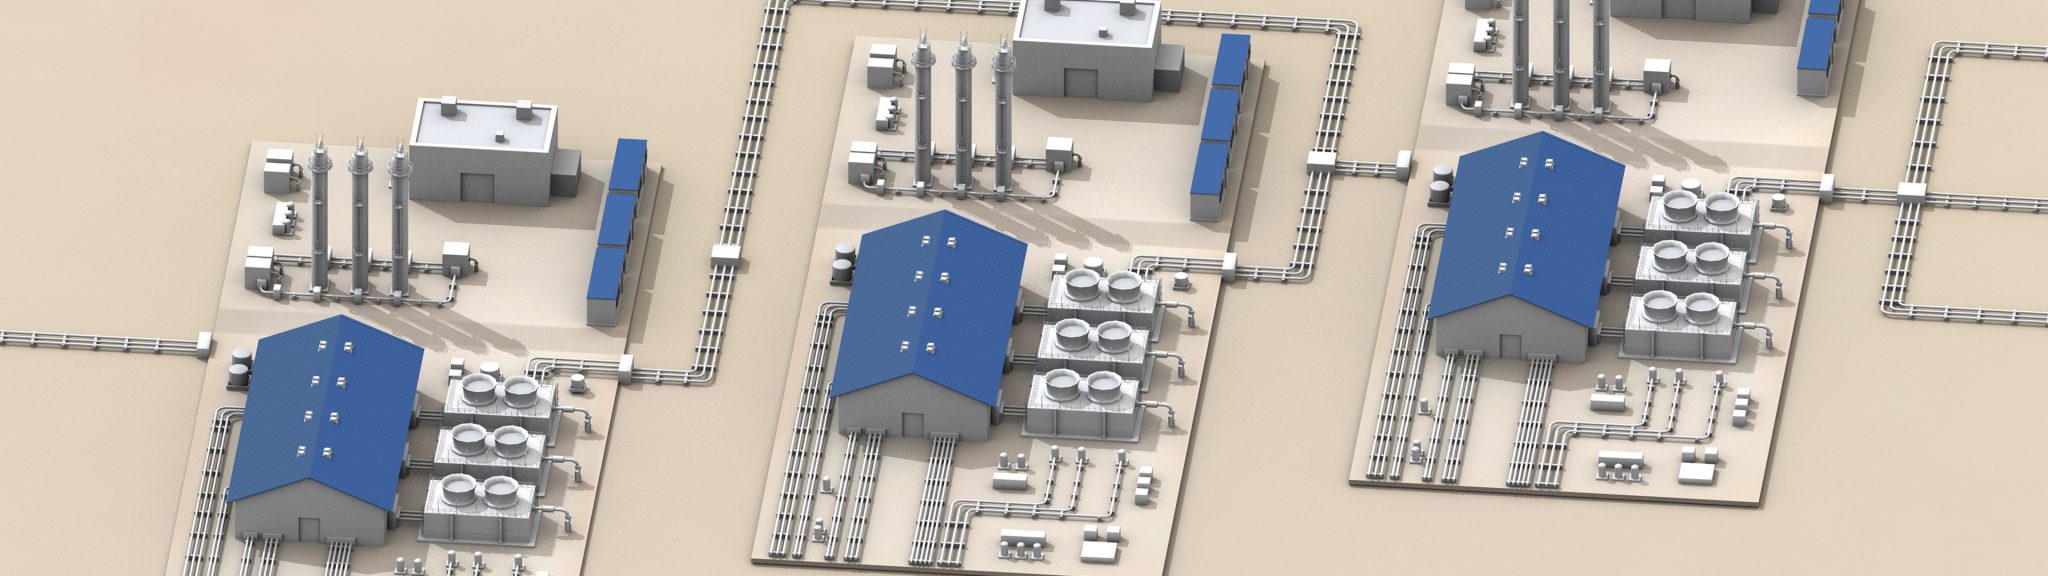 A rendering of three compressor stations, each used to maintain a high pressure within the pipeline